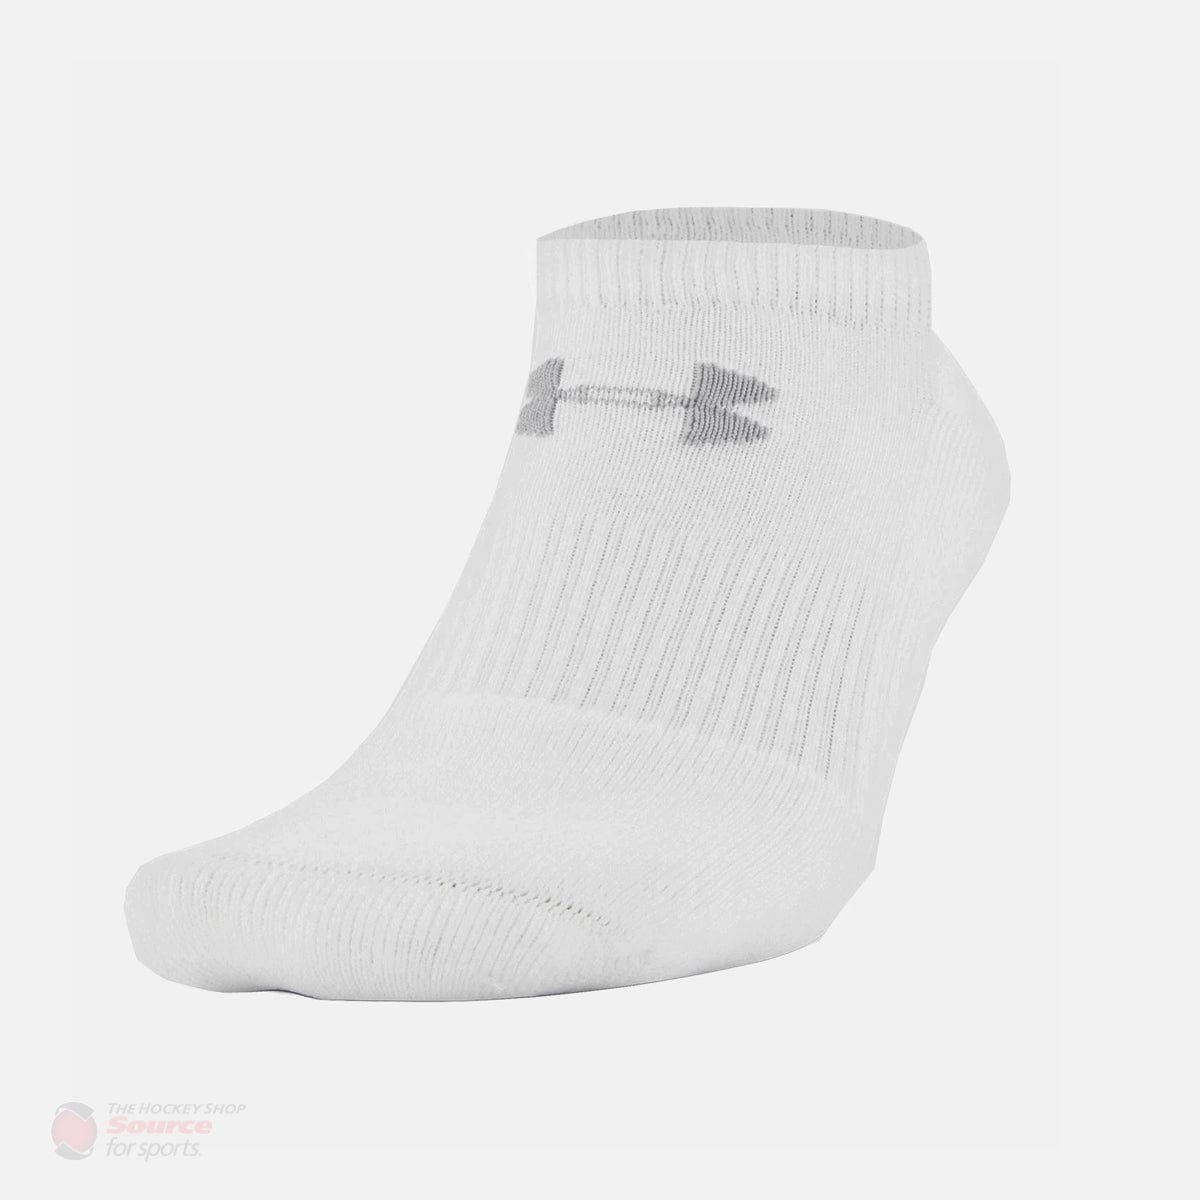 Under Armour Charged Cotton No Show White Performance Socks - 6 Pack